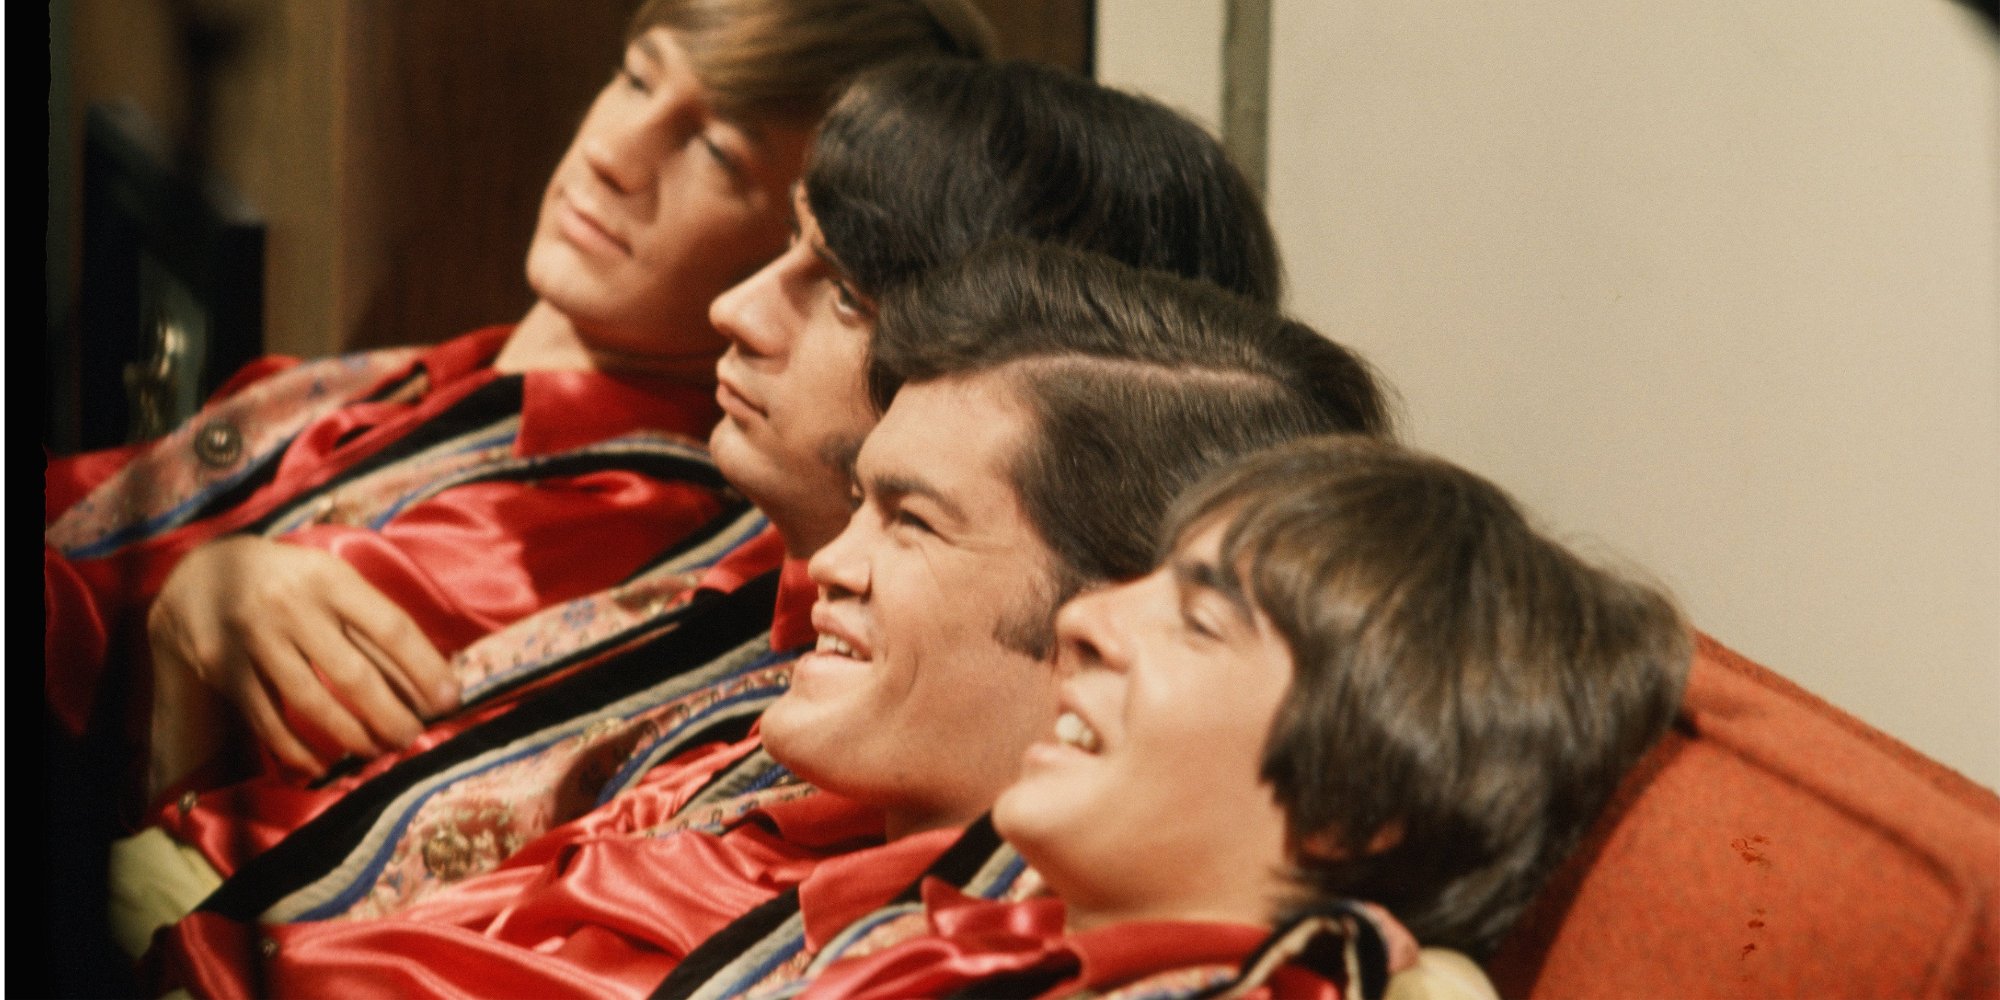 Peter Tork, Mike Nesmith, Micky Dolenz, and Davy Jones on the set of 'The Monkees.'